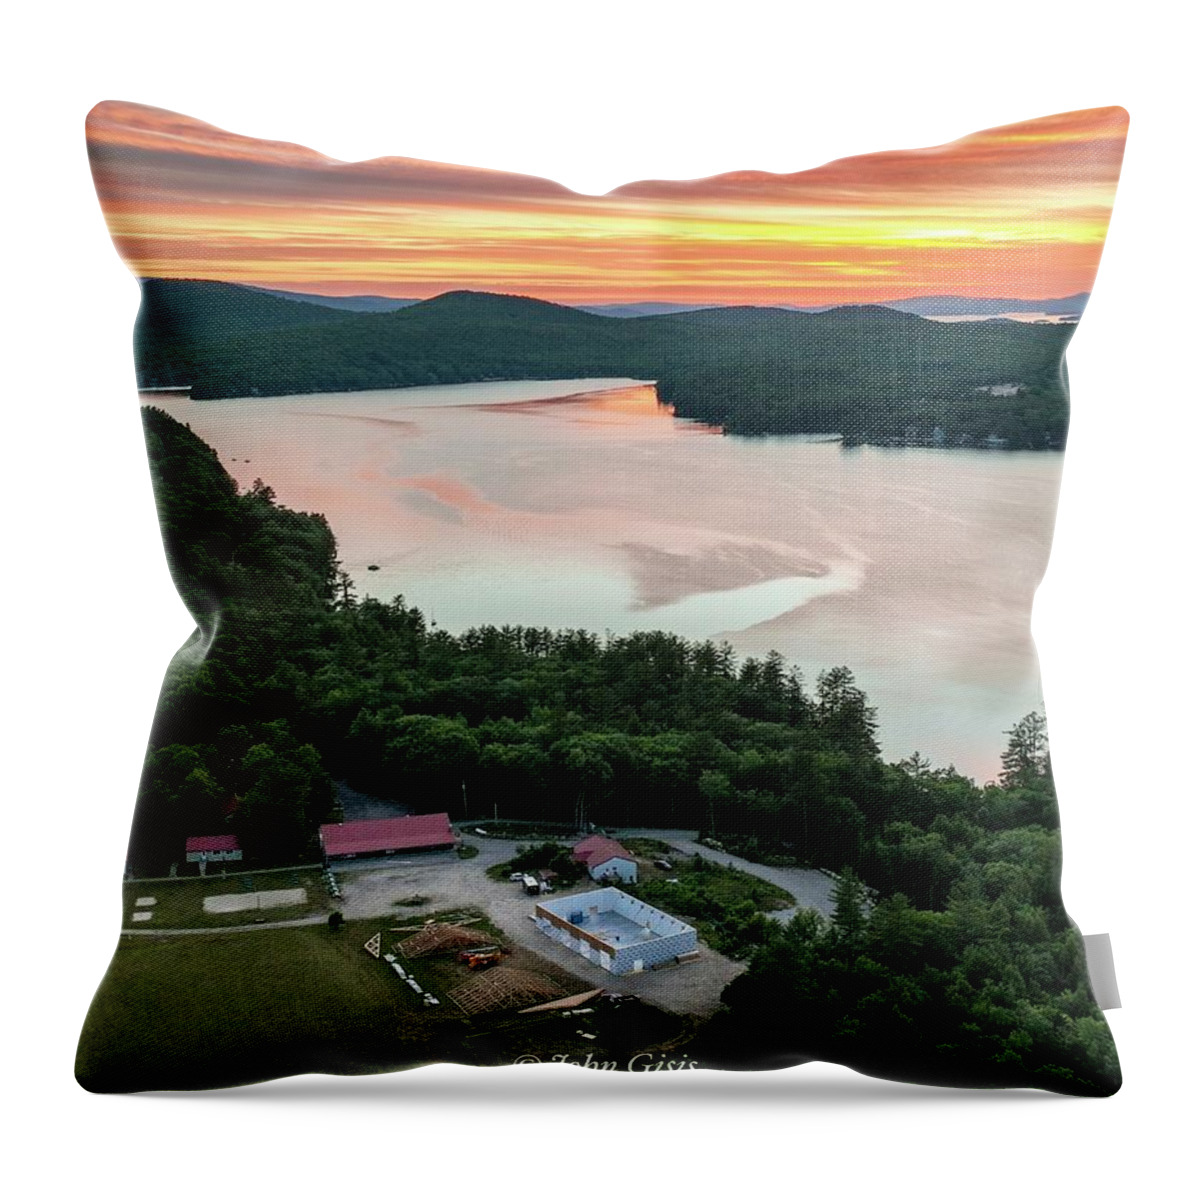  Throw Pillow featuring the photograph Lions Camp Pride by John Gisis